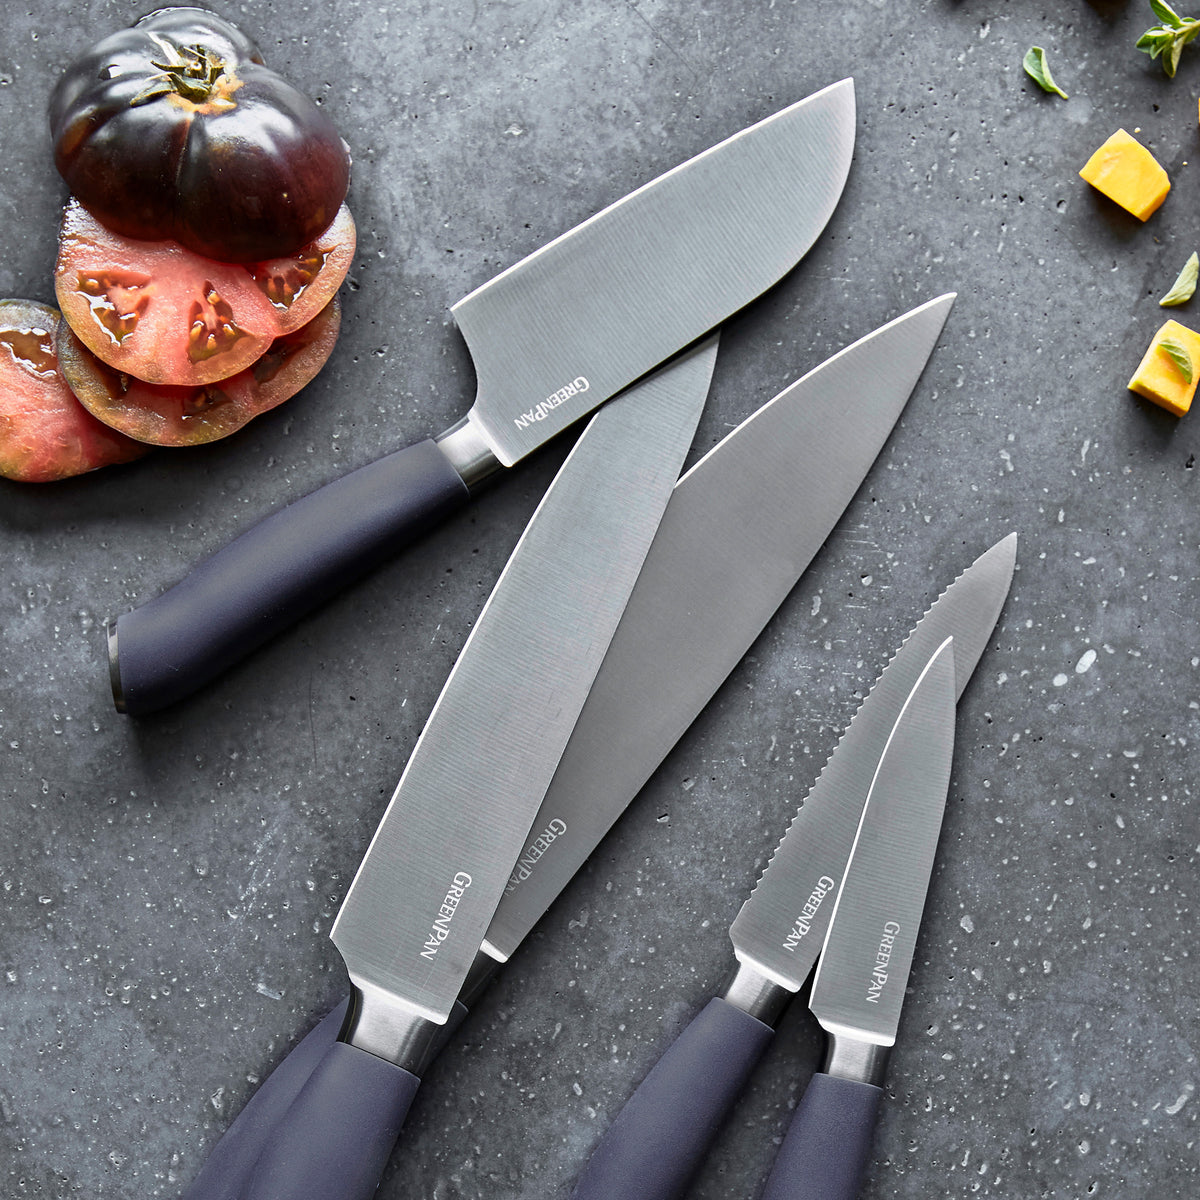 The Best Paring Knives for Every Home Cook